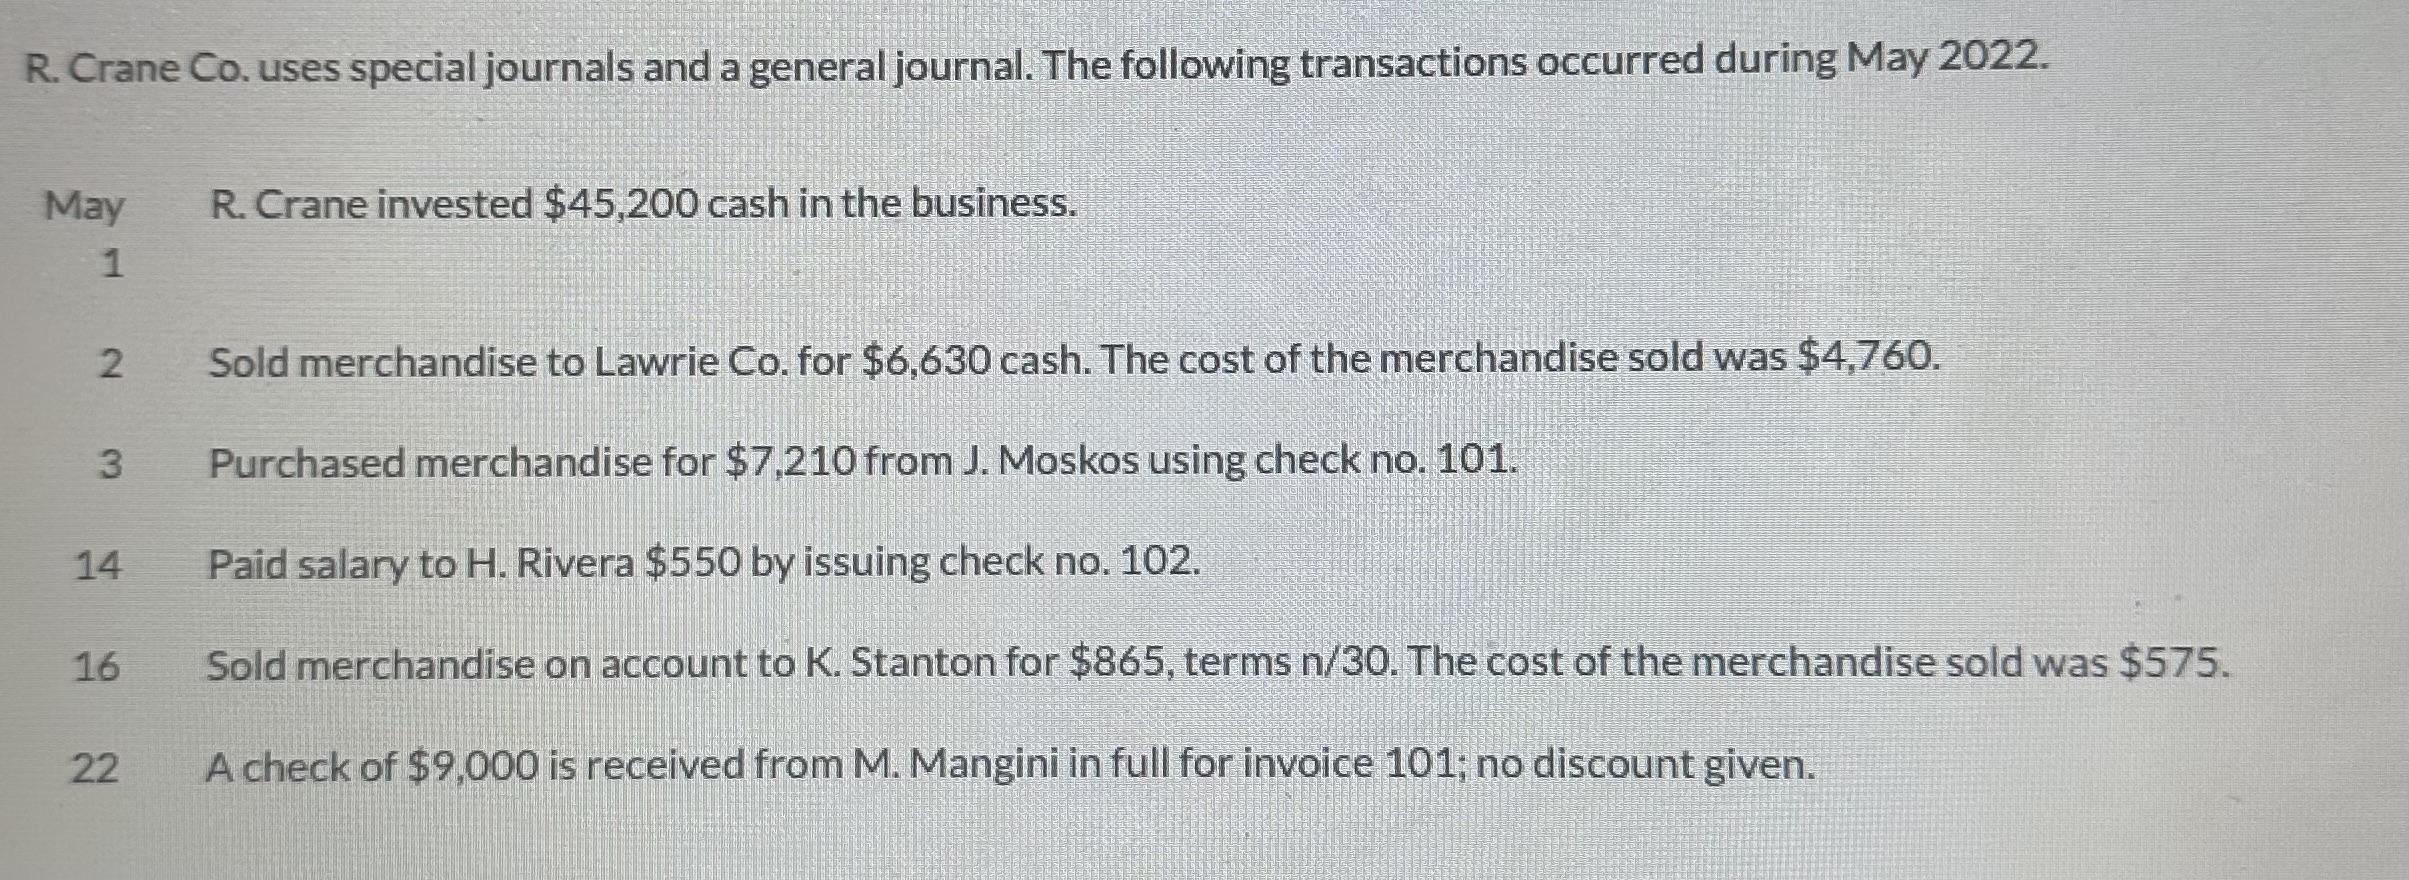 R. Crane Co. uses special journals and a general journal. The following transactions occurred during May